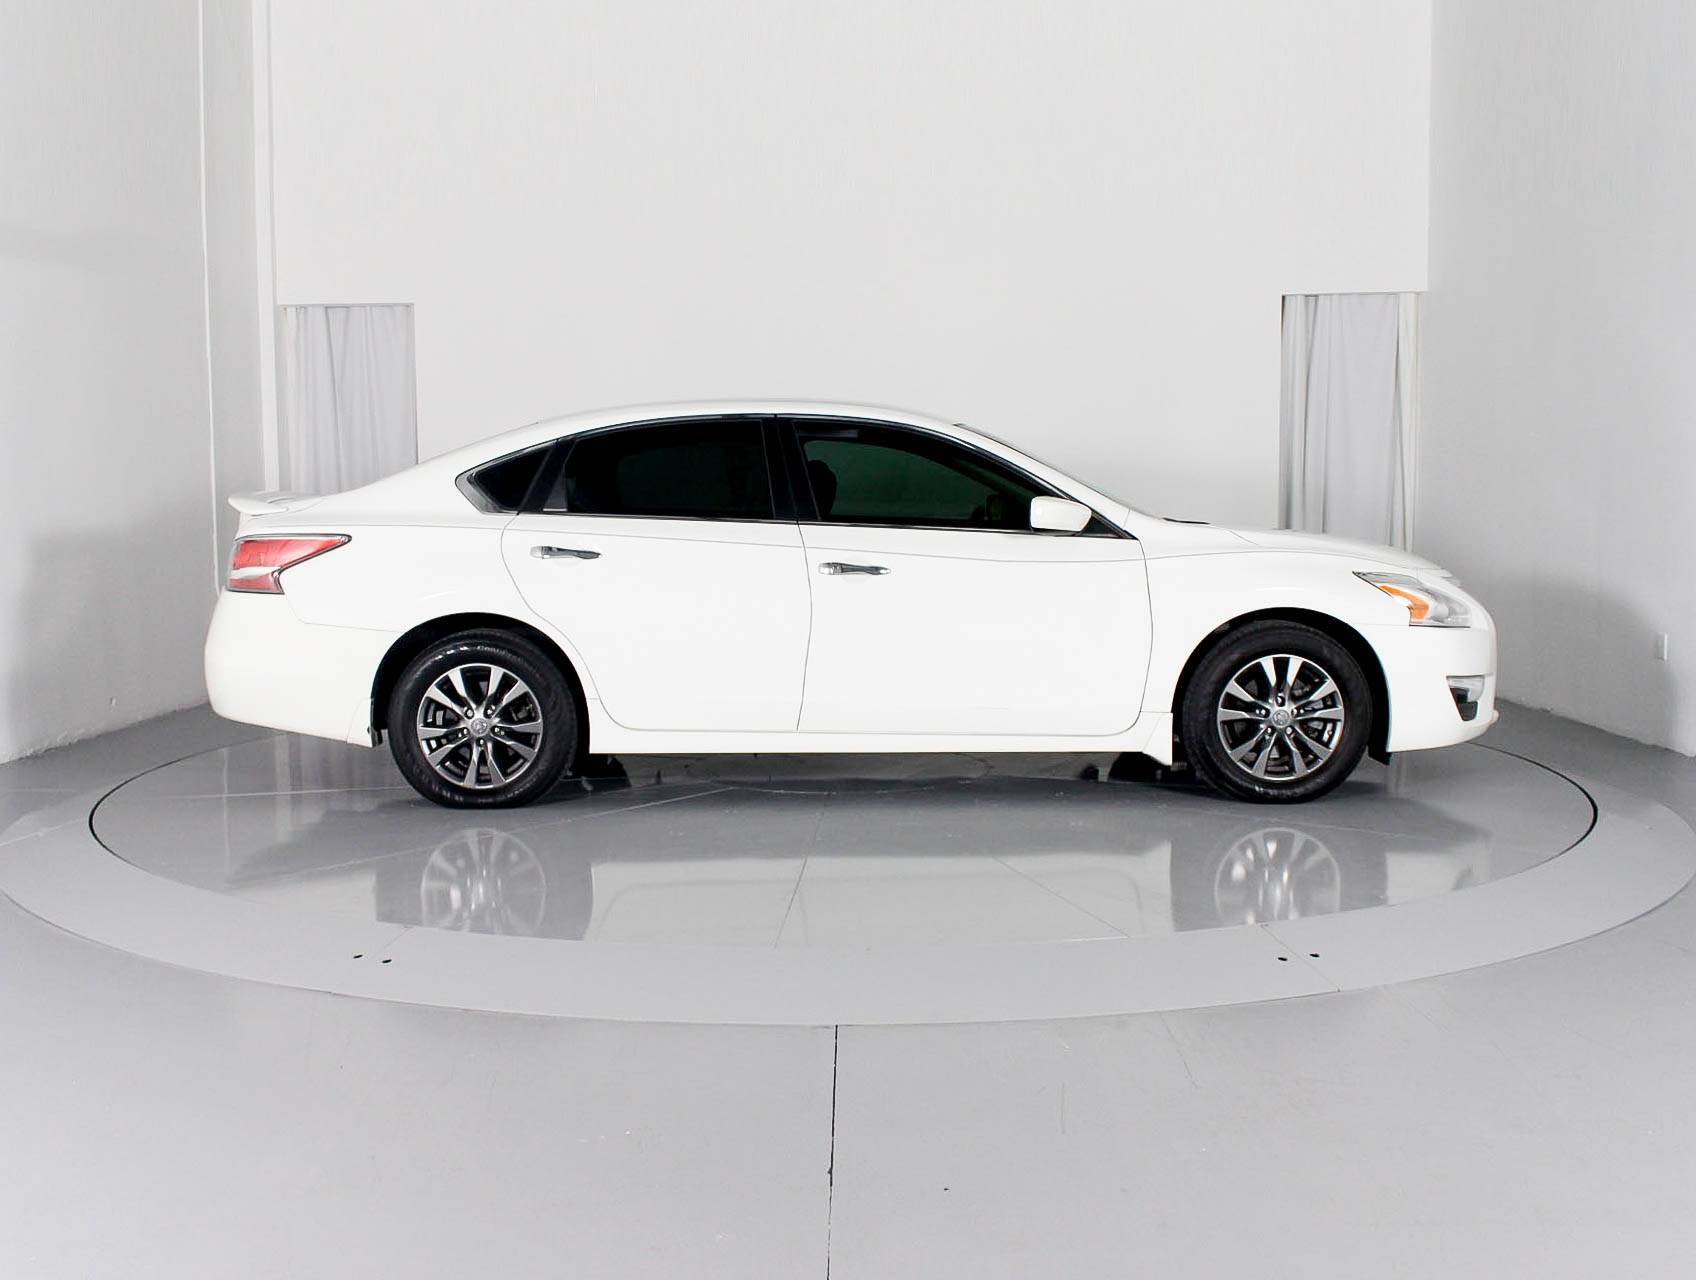 Florida Fine Cars - Used NISSAN ALTIMA 2015 MARGATE S Sport Package